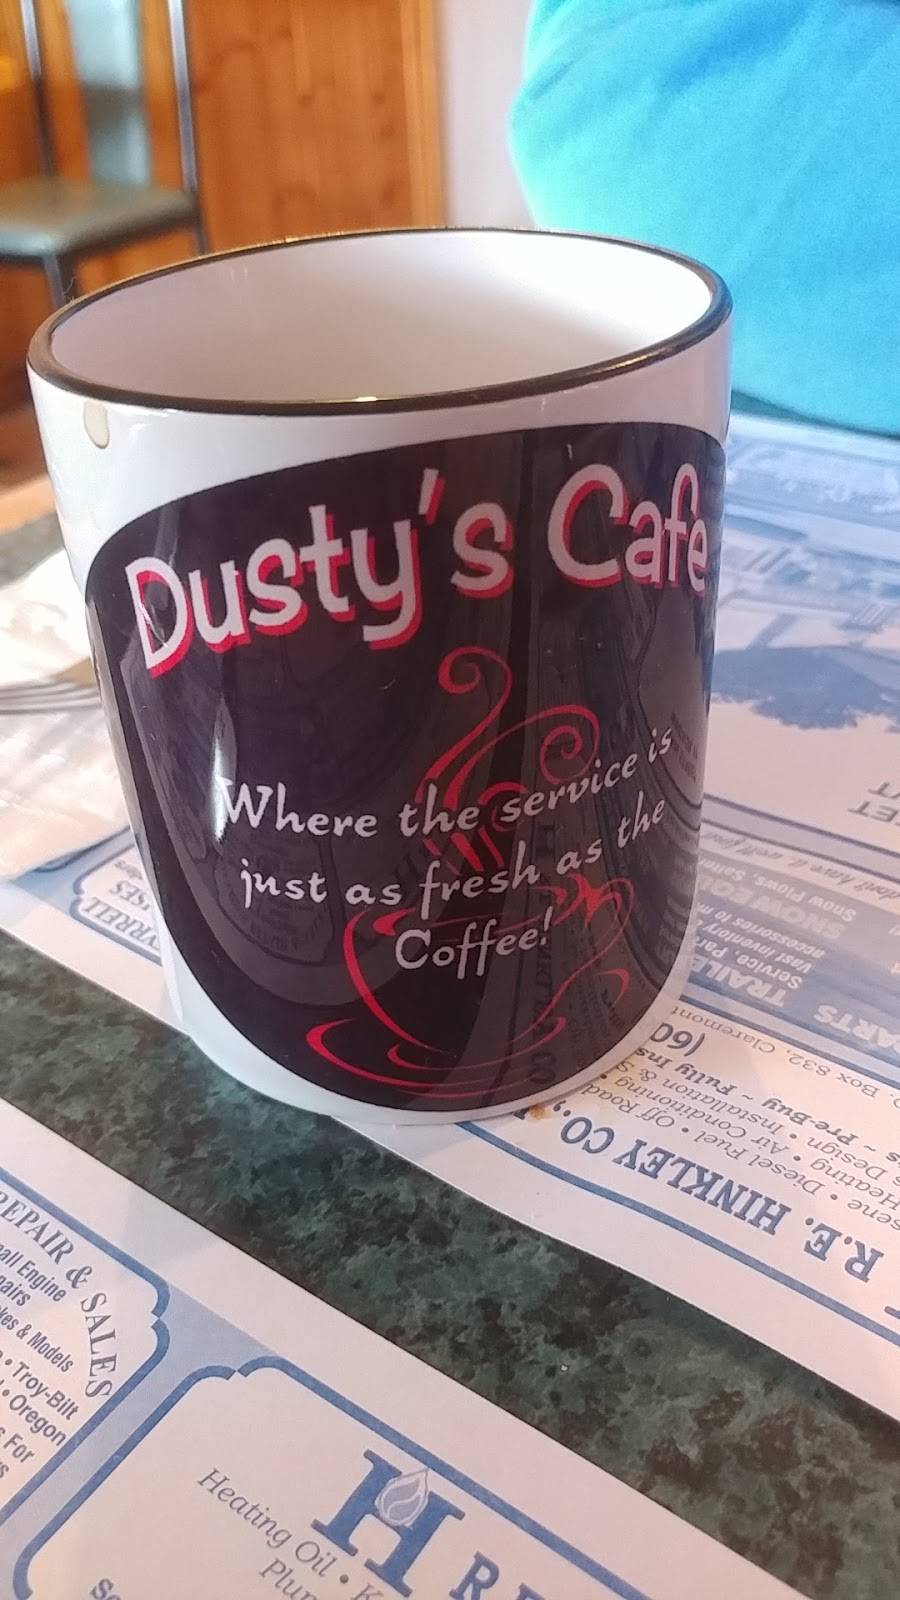 Dustys | restaurant | 93 Pleasant St, Claremont, NH 03743, USA | 6035431131 OR +1 603-543-1131